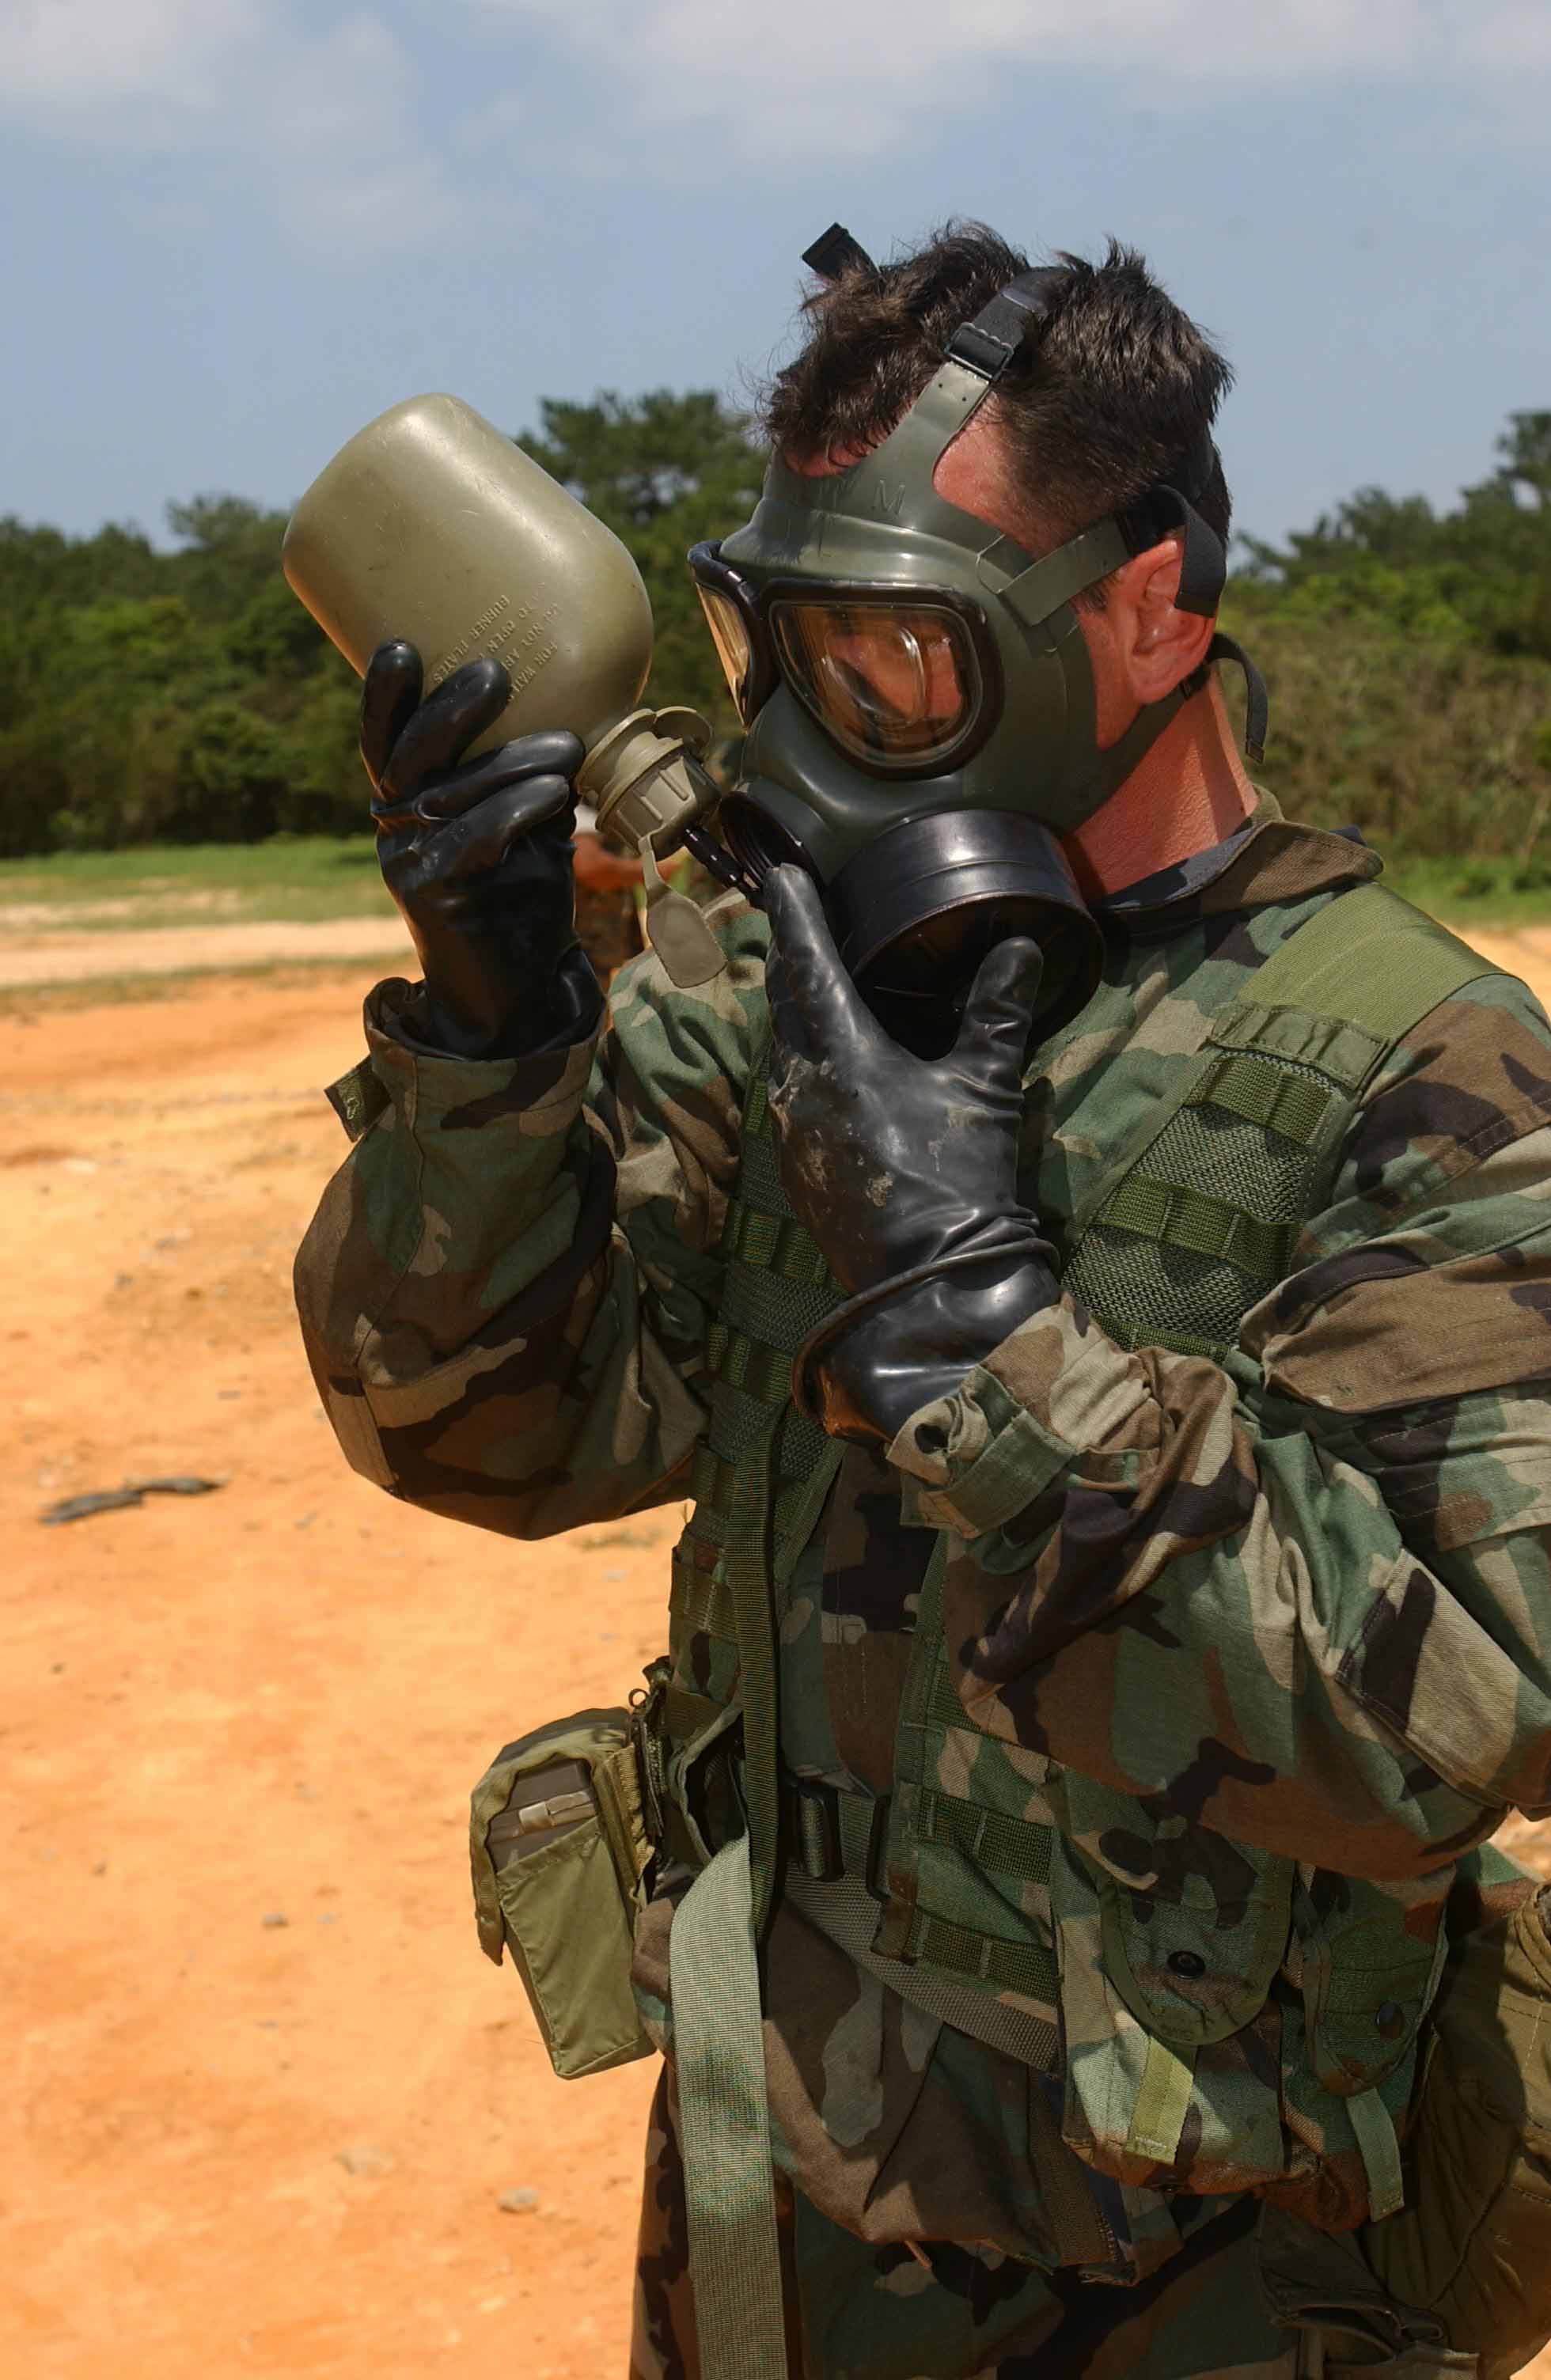 US Navy 030428-M-1852W-037 Hospital Corpsman John Copeck assigned to 3D Medical Battalion, Training Company, takes a break to hydrate after connecting his canteen to his gas mask